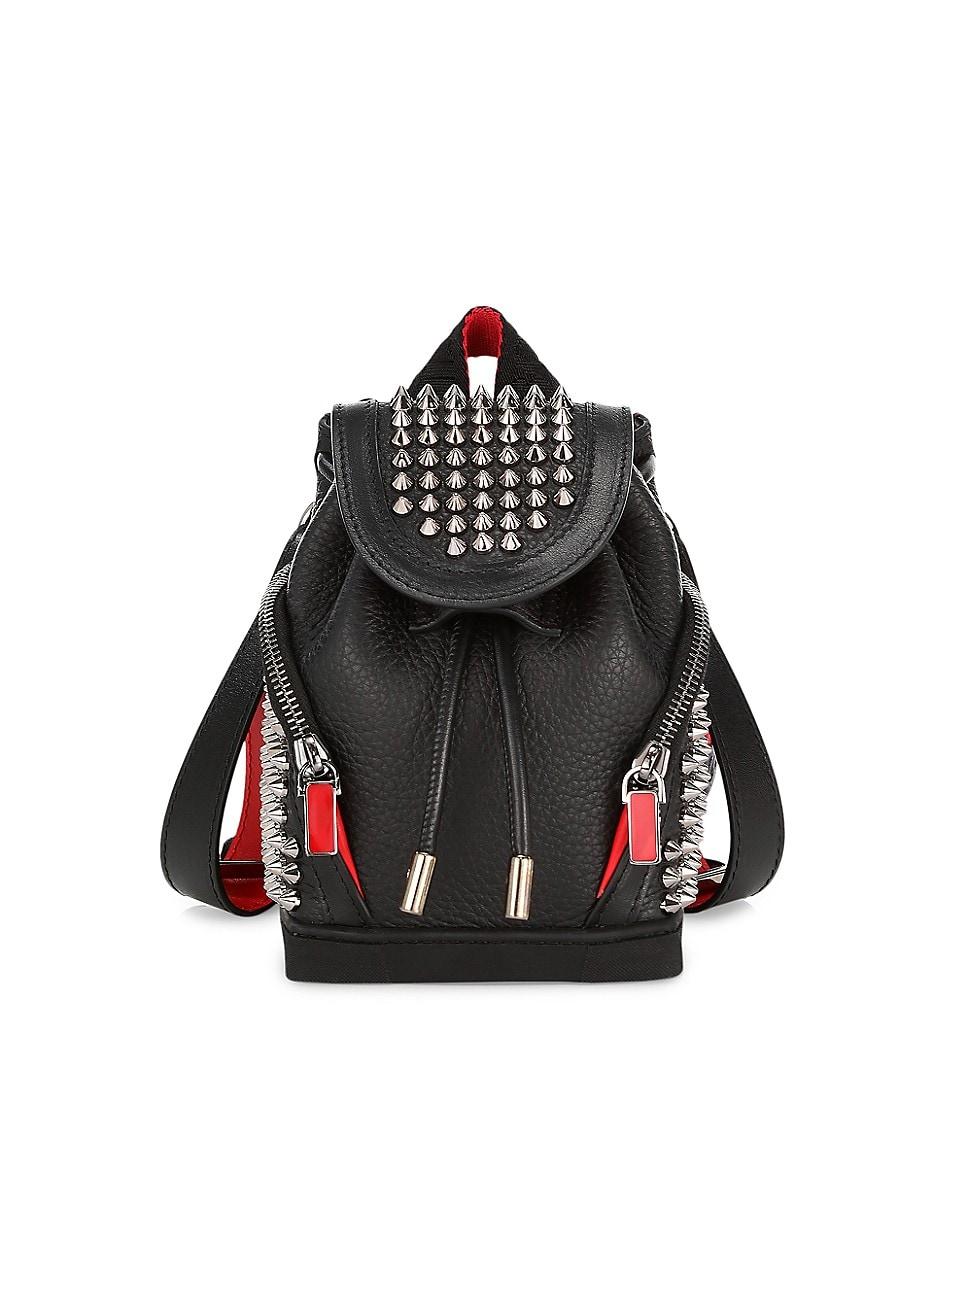 Men's Explorafunk Spiked Leather Backpack